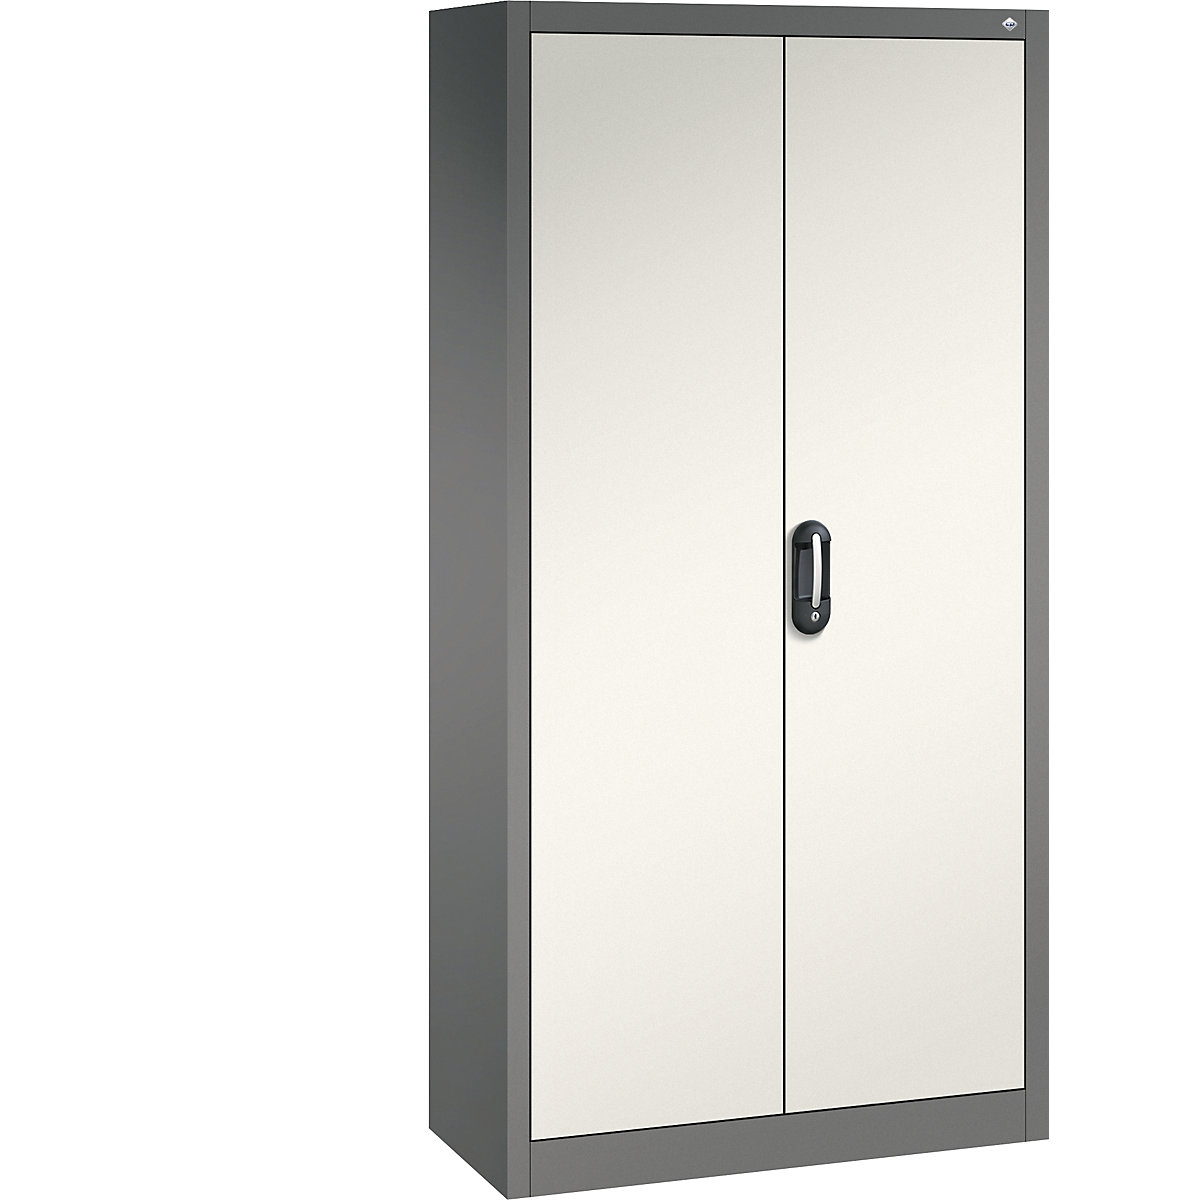 ACURADO universal cupboard – C+P, WxD 930 x 400 mm, volcanic grey / oyster white-35